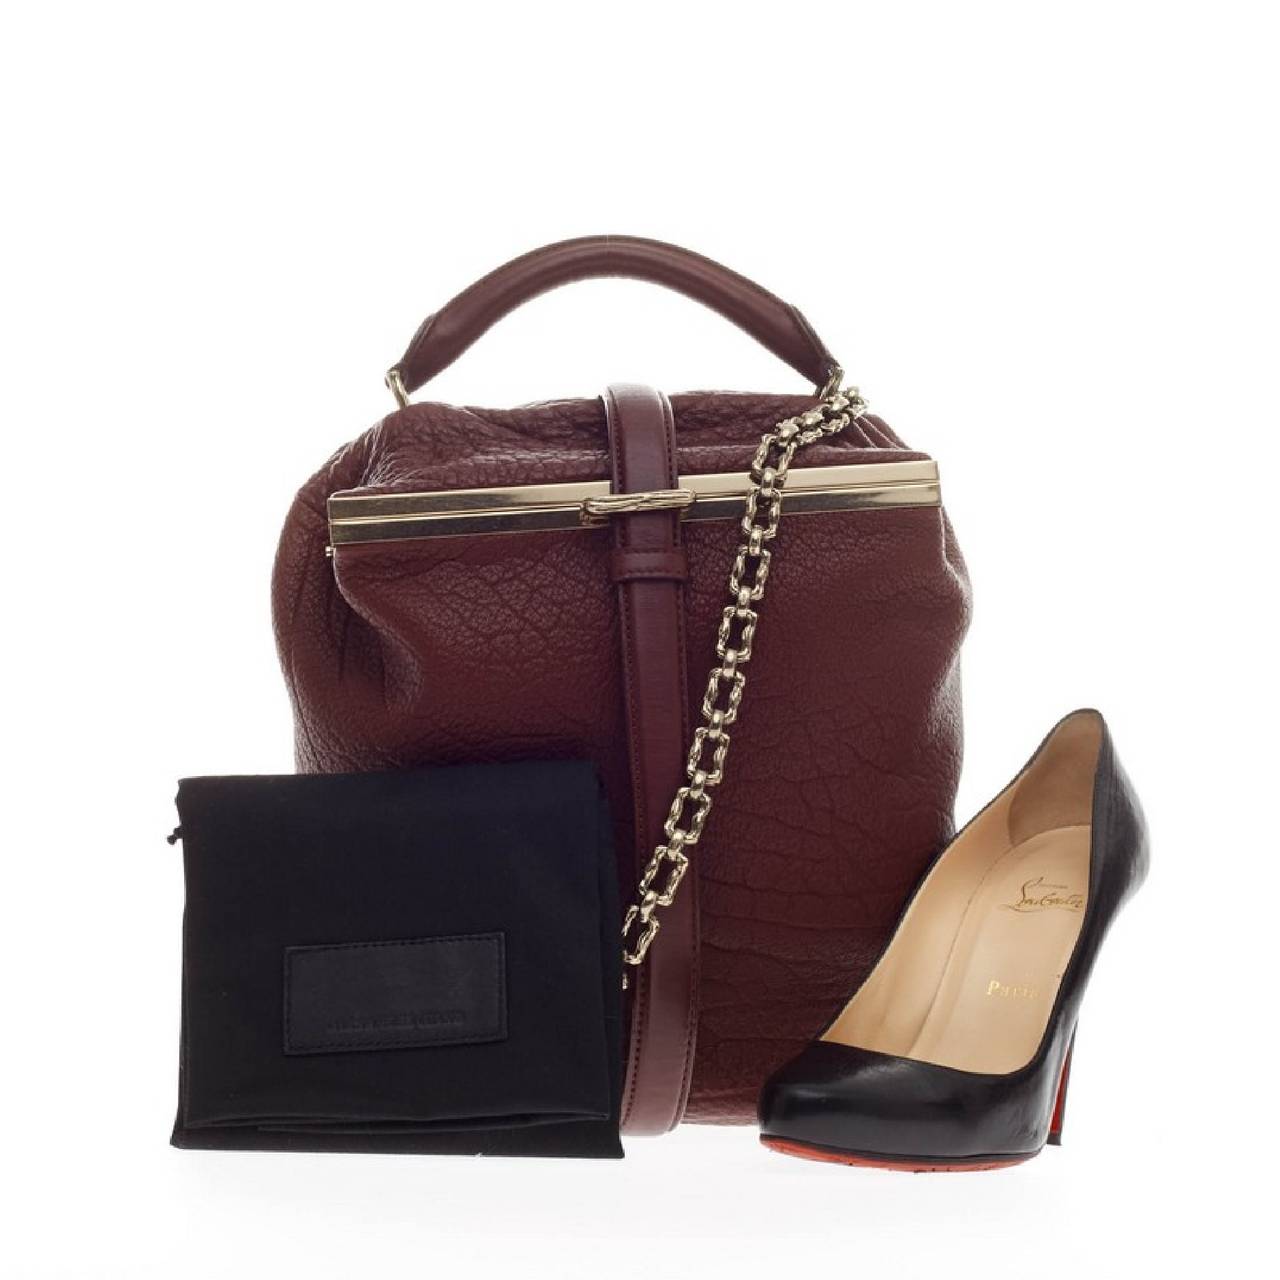 This authentic Alexander Wang Willow Frame Messenger Bag Pebbled Leather presented in the brand's Spring/ Summer 2011 Collection mixes style and functionality all in one. Crafted in burgundy pebbled leather, this updated messenger-style bag features